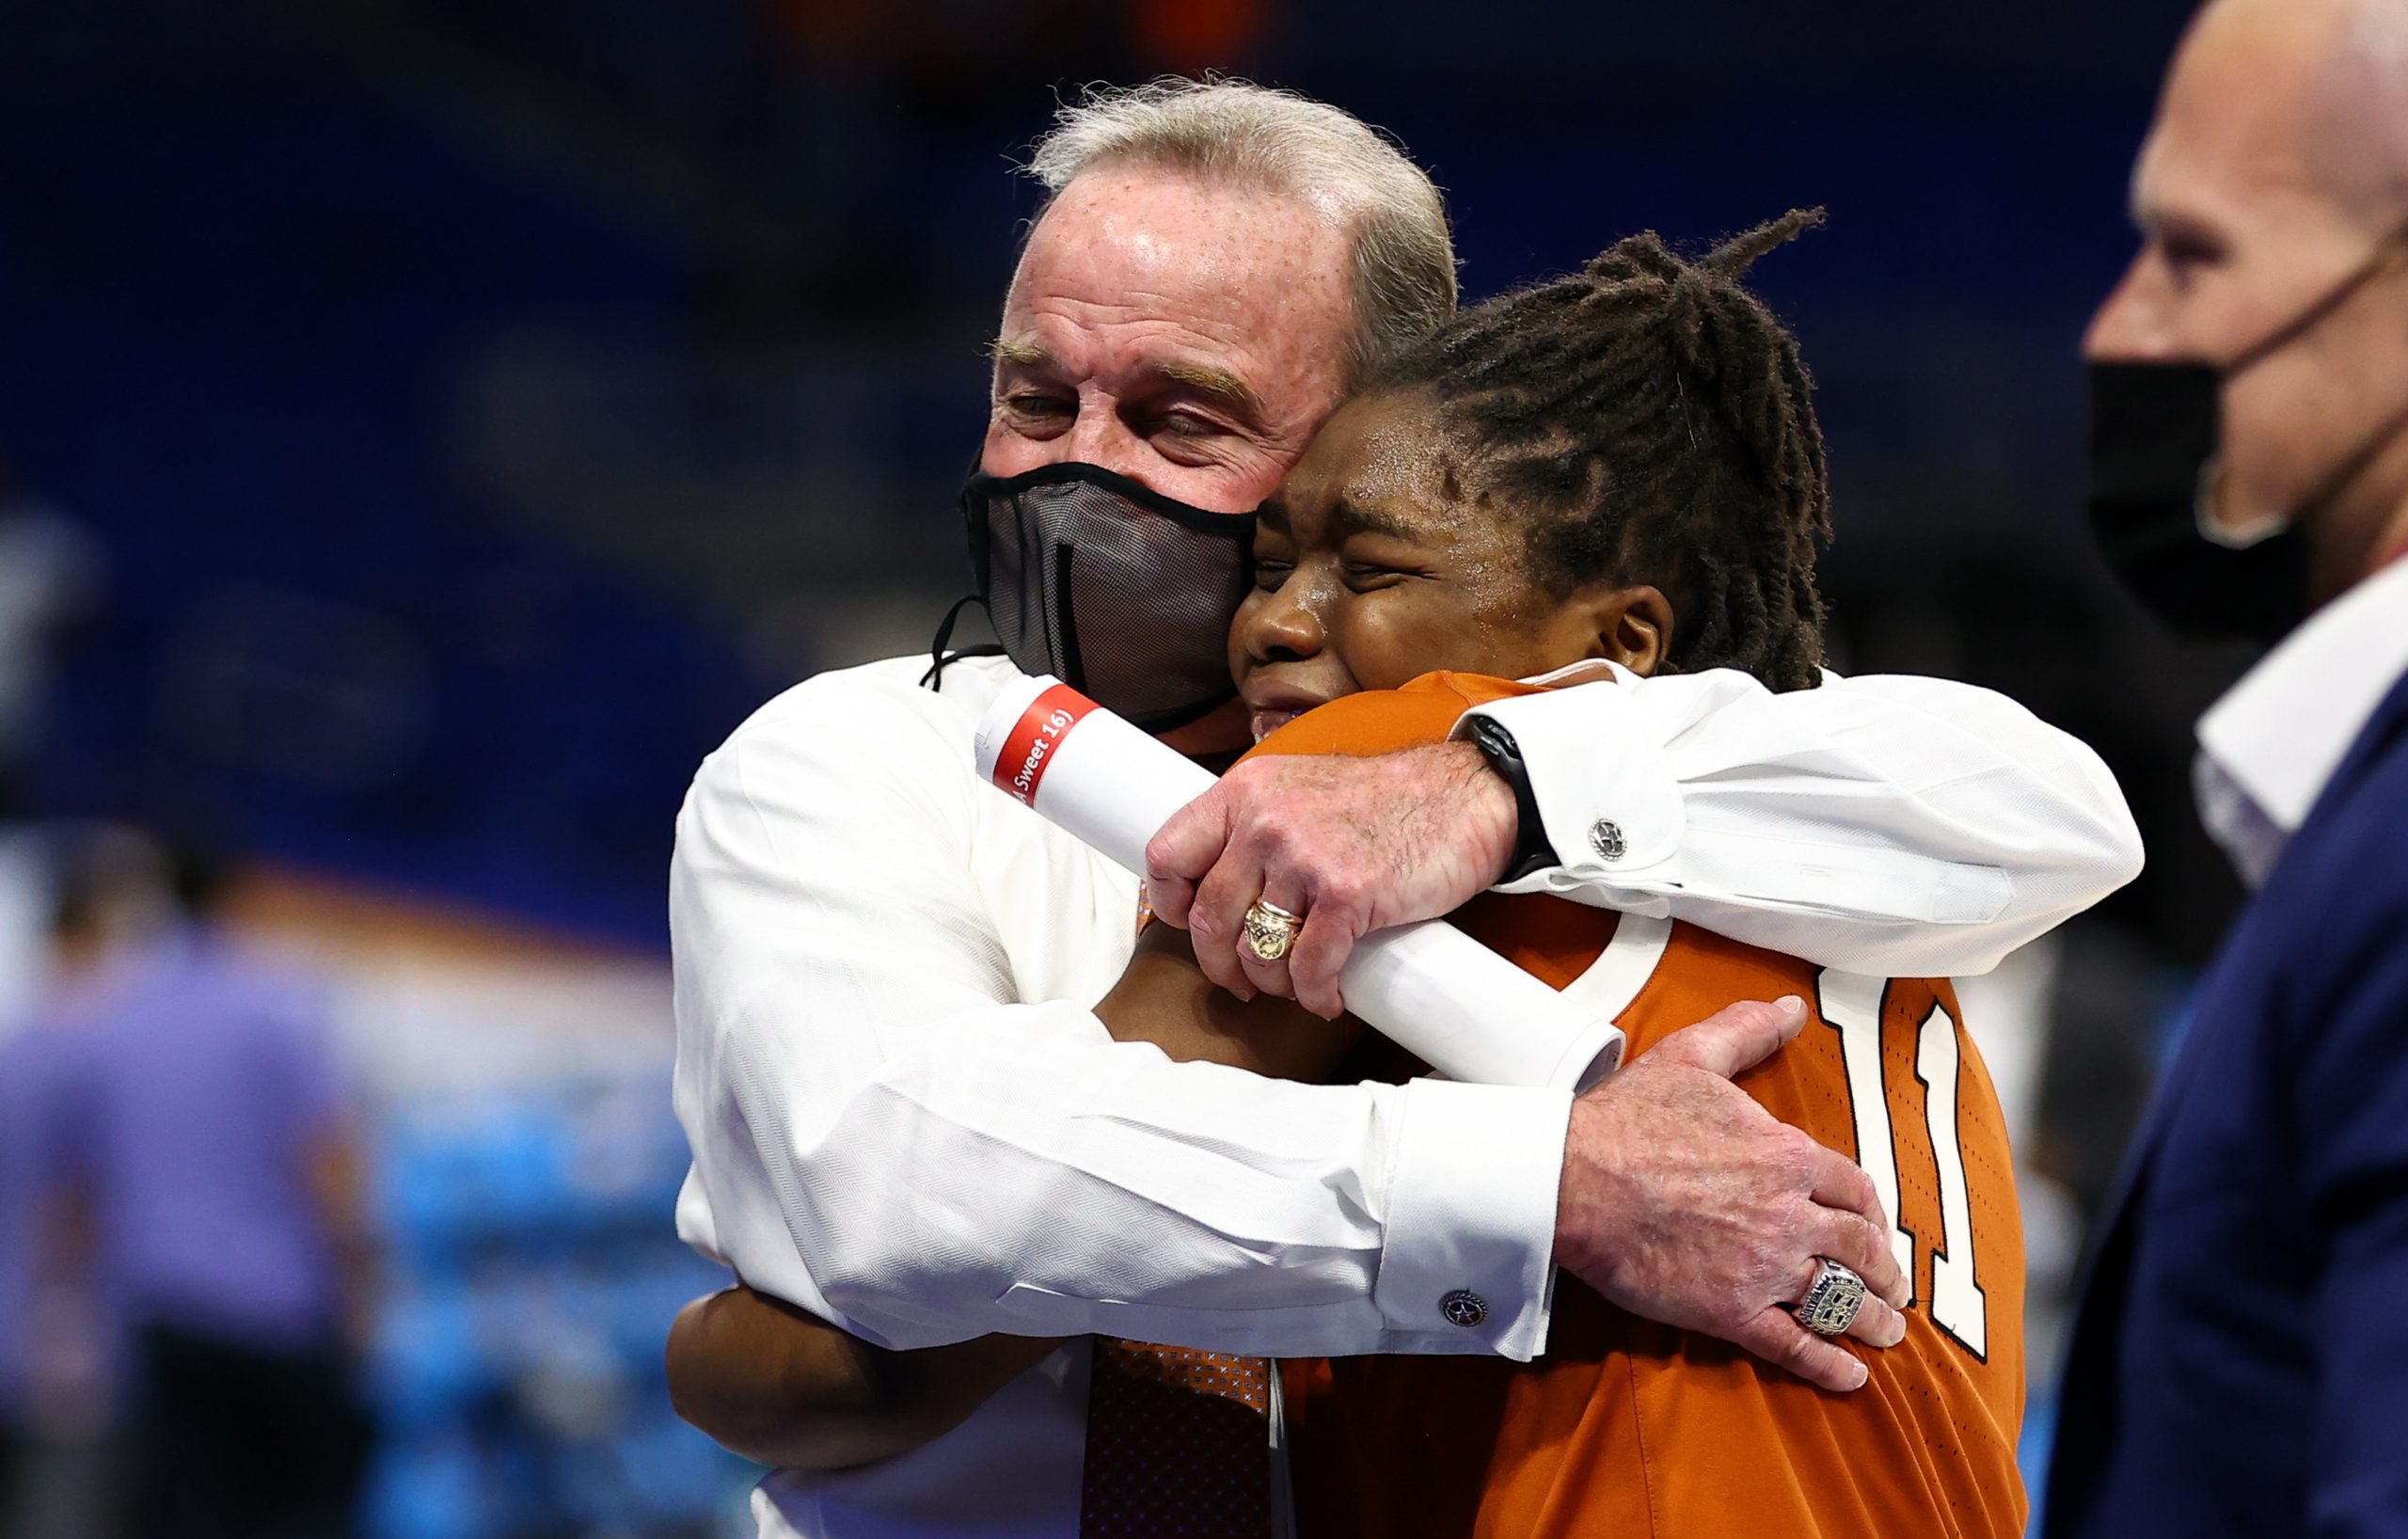 SAN ANTONIO, TX - MARCH 28: Texas takes on Maryland in the Sweet Sixteen round of the NCAA Women’s Basketball Tournament at Alamodome on March 28, 2021 in San Antonio, Texas. (Photo by Justin Tafoya/NCAA Photos via Getty Images)